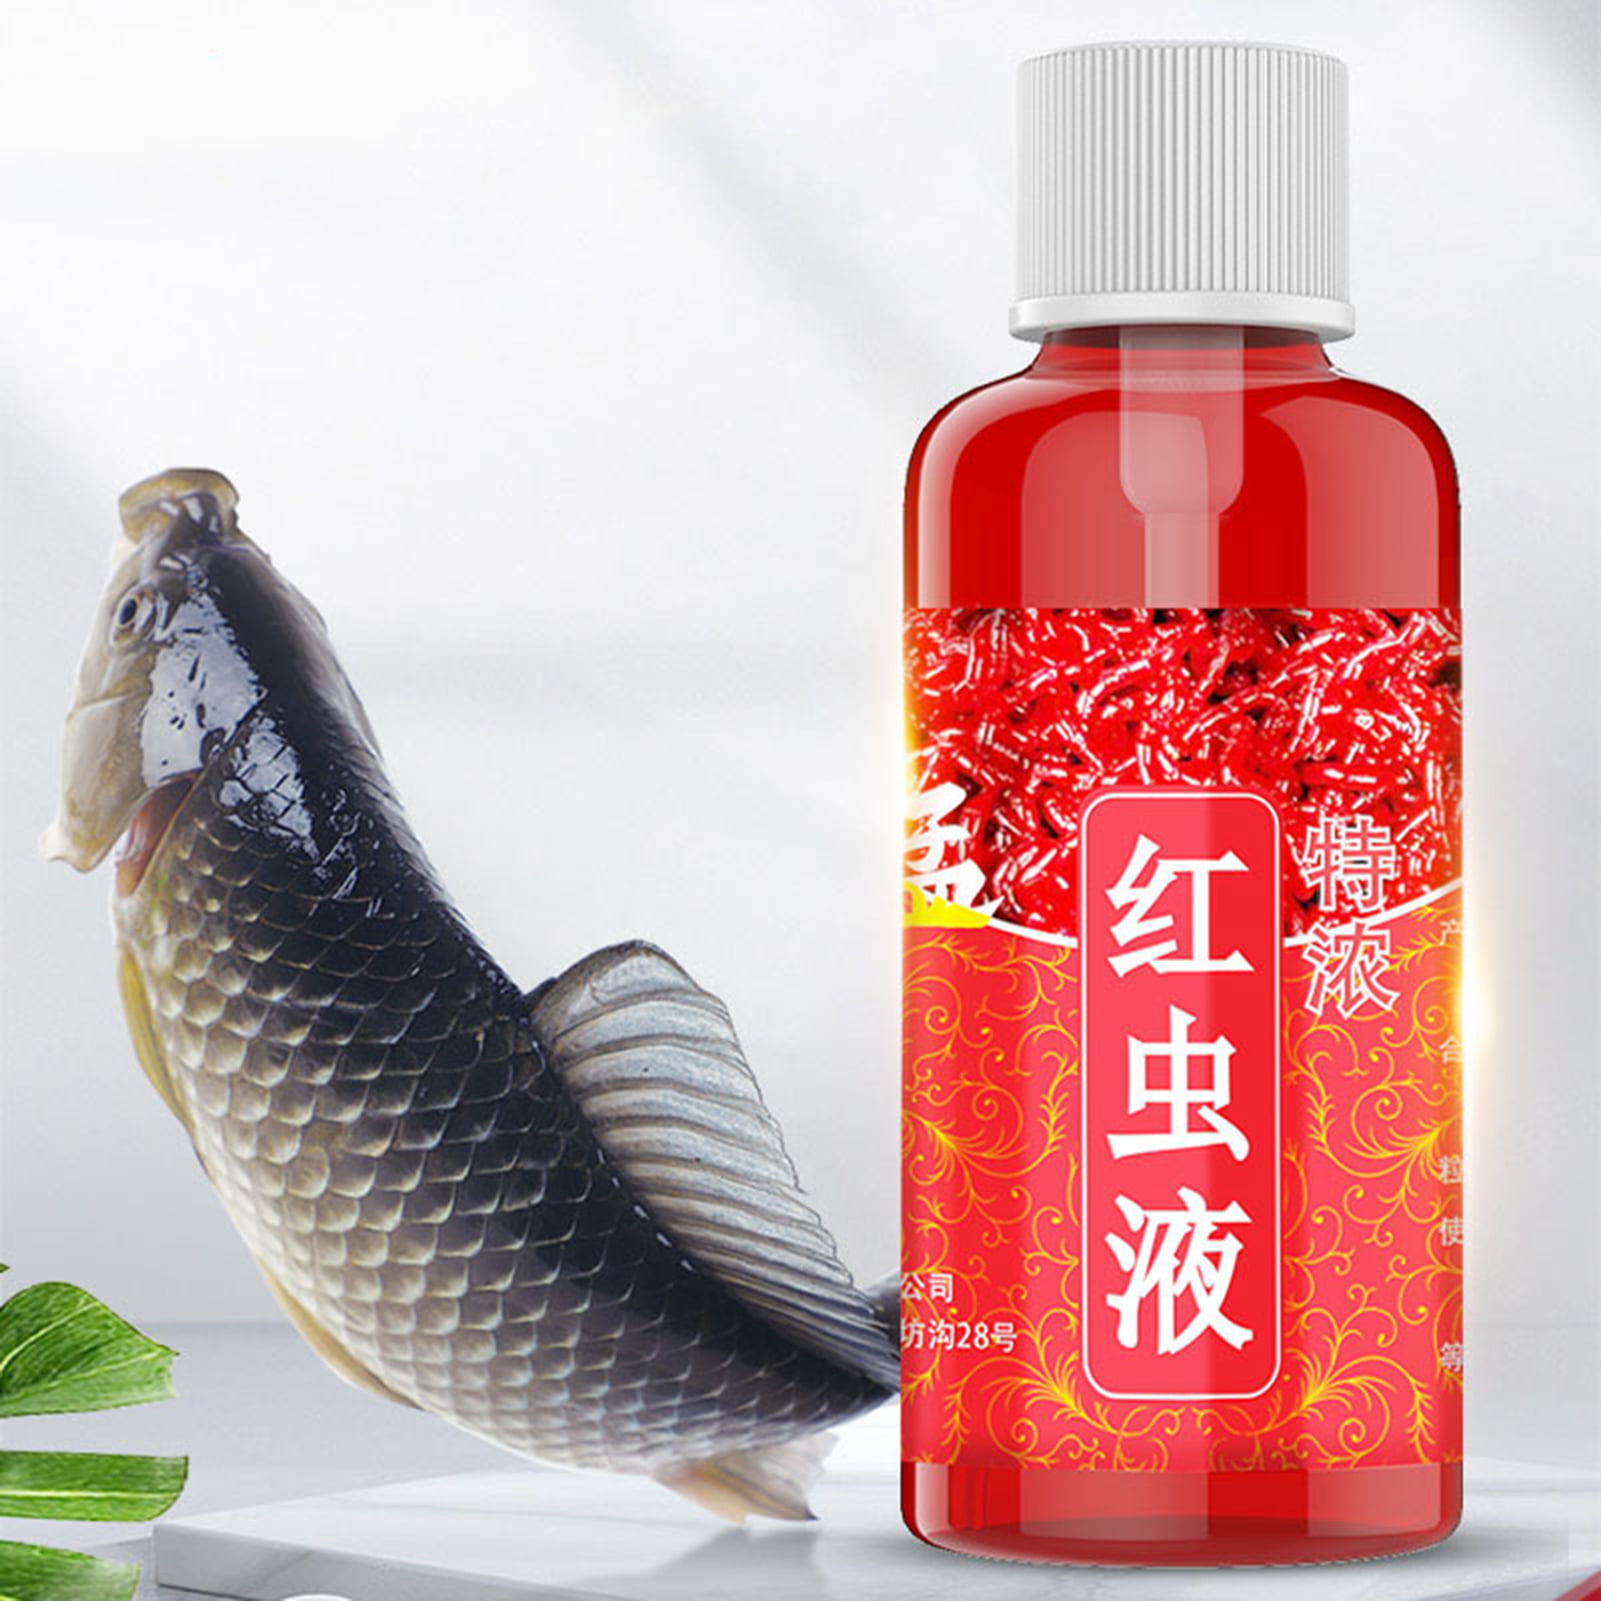 60ml Red Worm Liquid Bait, Fish Scent Bait Fish Additive, Concentrated Fishing  Lures Baits,Safe Effective Fish Bait Attractant Enhancer 